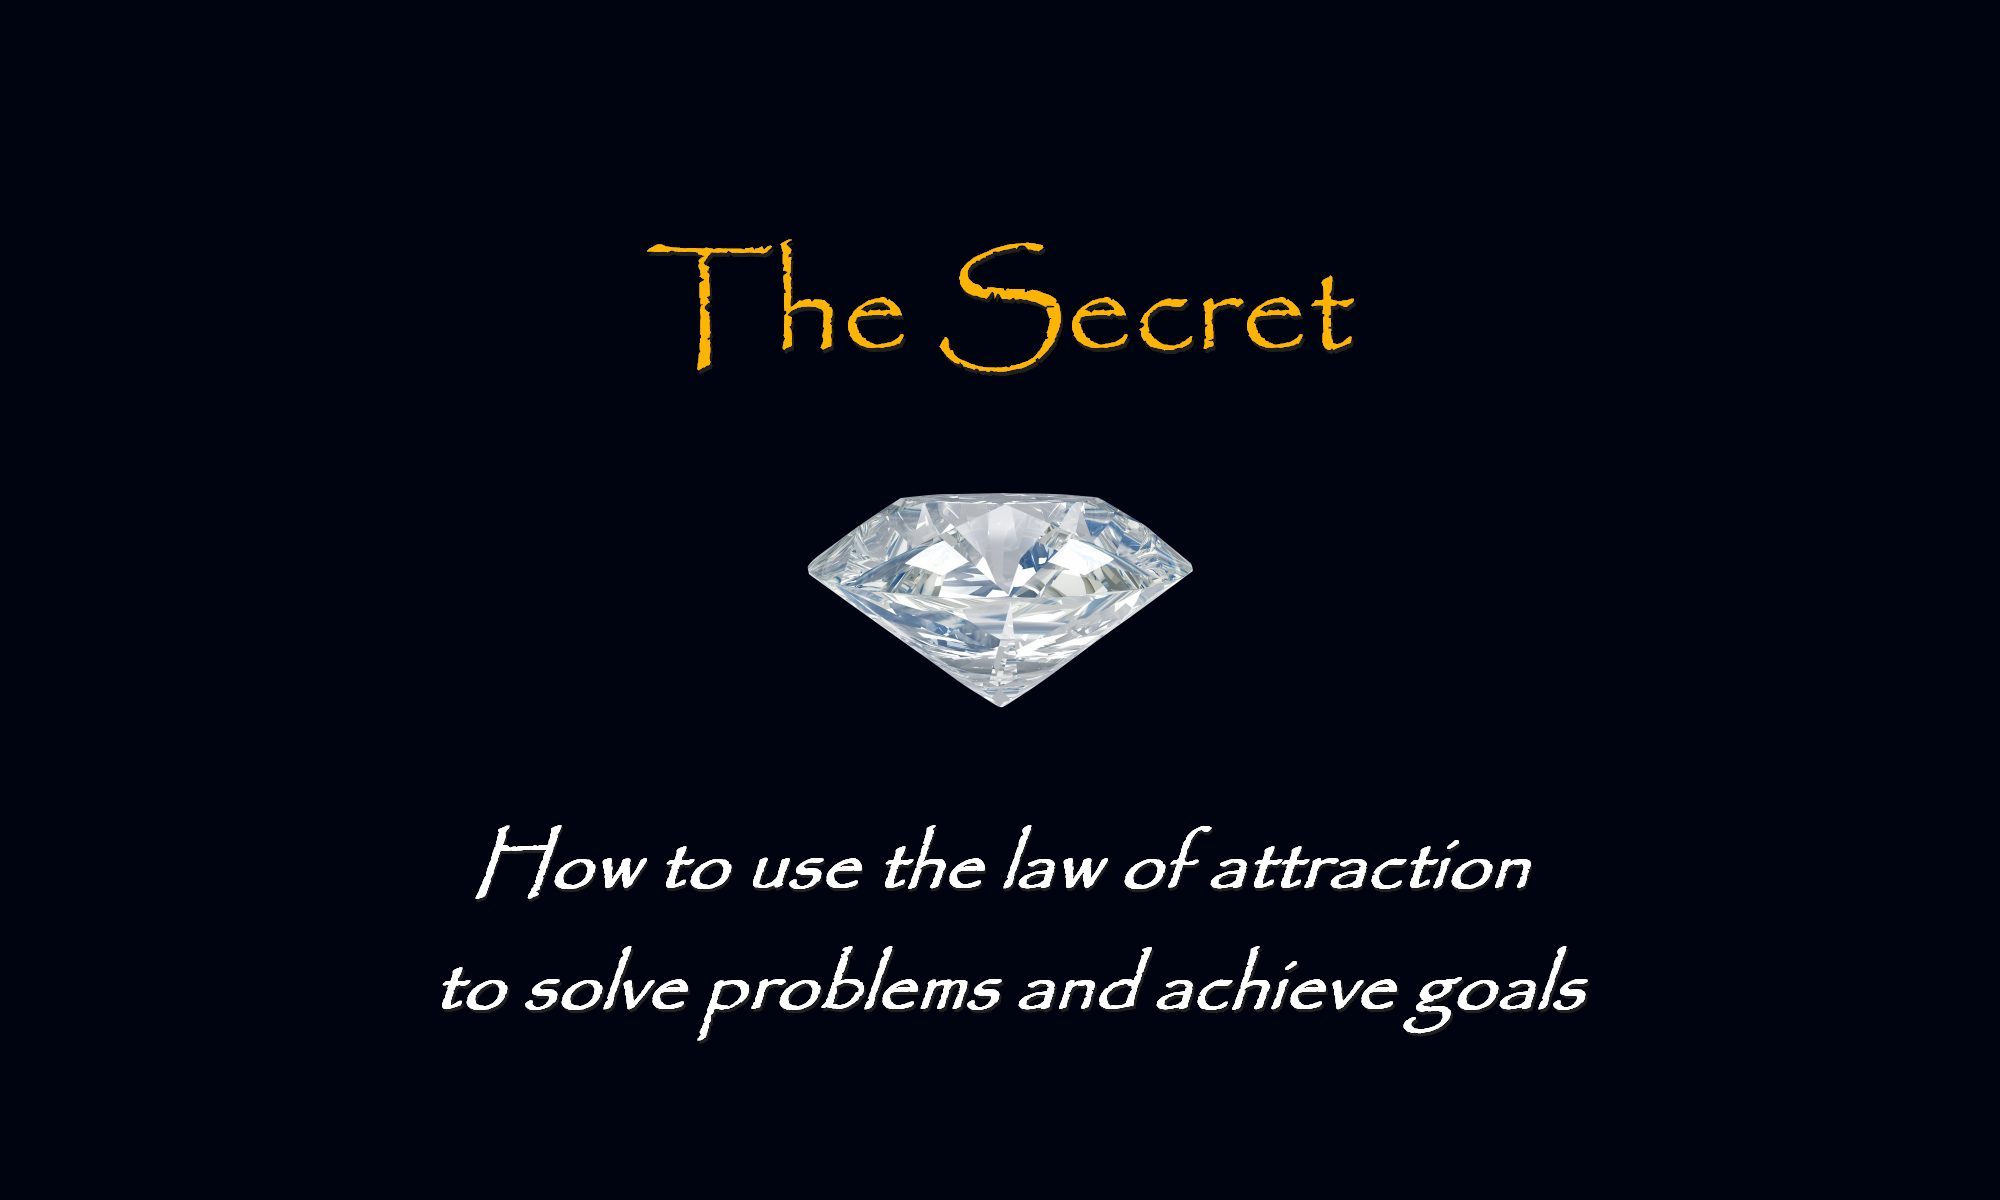 THE SECRET: How to Use the Law of Attraction to Solve difficult Problems & Achieve Goals